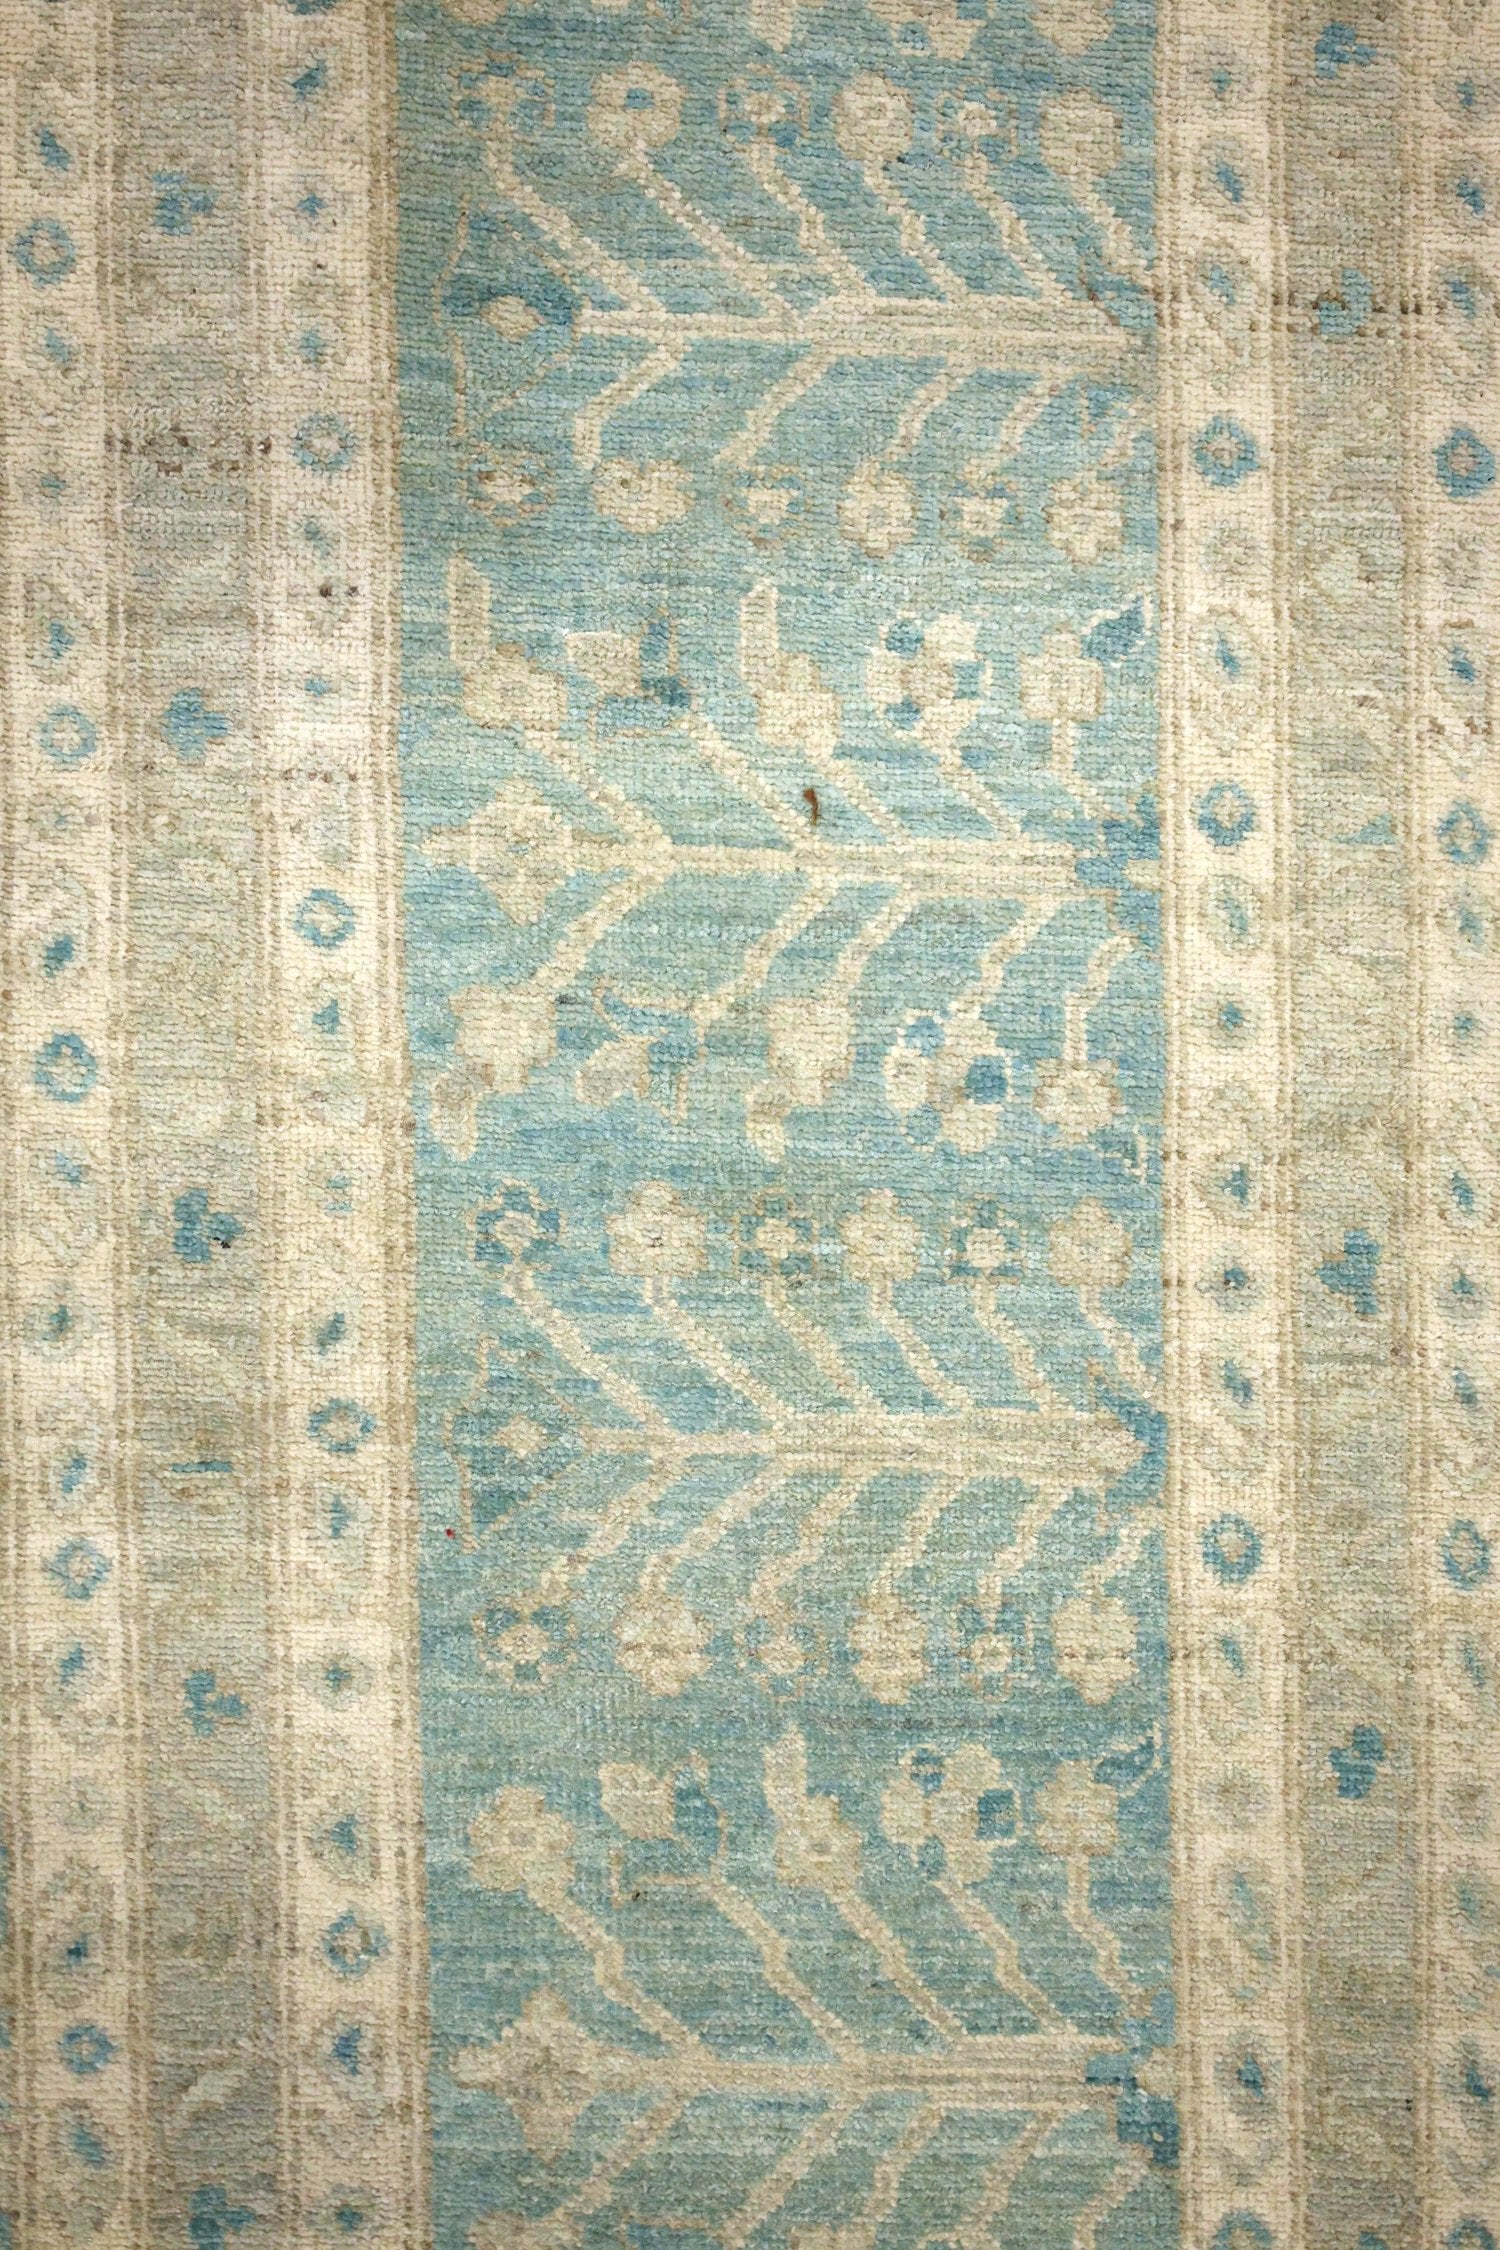 Sultanabad Handwoven Traditional Rug, J70126